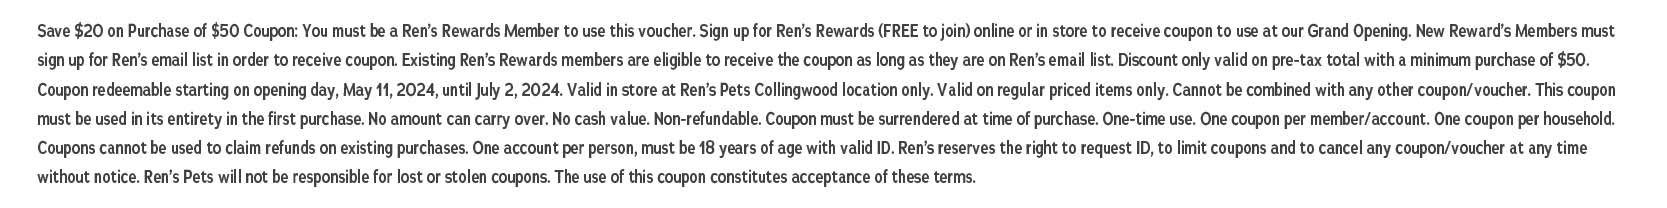 Save $20 on Purchase of $50 Coupon: You must be a Ren's Rewards Member to use this voucher. Sign up for Ren's Rewards (FREE to join) online or in store to receive coupon to use at our Grand Opening, New Reward's Members must sign up for Ren's email list in order to receive coupon. Existing Ren's Rewards members are eligible to receive the coupon as long as they are on Ren's email list. Discount only valid on pre-tax total with a minimum purchase of $50. Coupon redeemable starting on opening day, May 11, 2024, until July 2, 2024. Valid in store at Ren's Pets Collingwood location only. Valid on regular priced items only. Cannot be combined with any other coupon/voucher. This coupon must be used in its entirety in the first purchase. No amount can carry over. No cash value. Non-refundable. Coupon must be surrendered at time of purchase. One-time use. One coupon per member/account. One coupon per household Coupons cannot be used to claim refunds on existing purchases. One account per person, must be 18 years of age with valid ID. Ren's reserves the right to request ID, to limit coupons and to cancel any coupon/voucher at any time without notice. Ren's Pets will not be responsible for lost or stolen coupons. The use of this coupon constitutes acceptance of these terms.